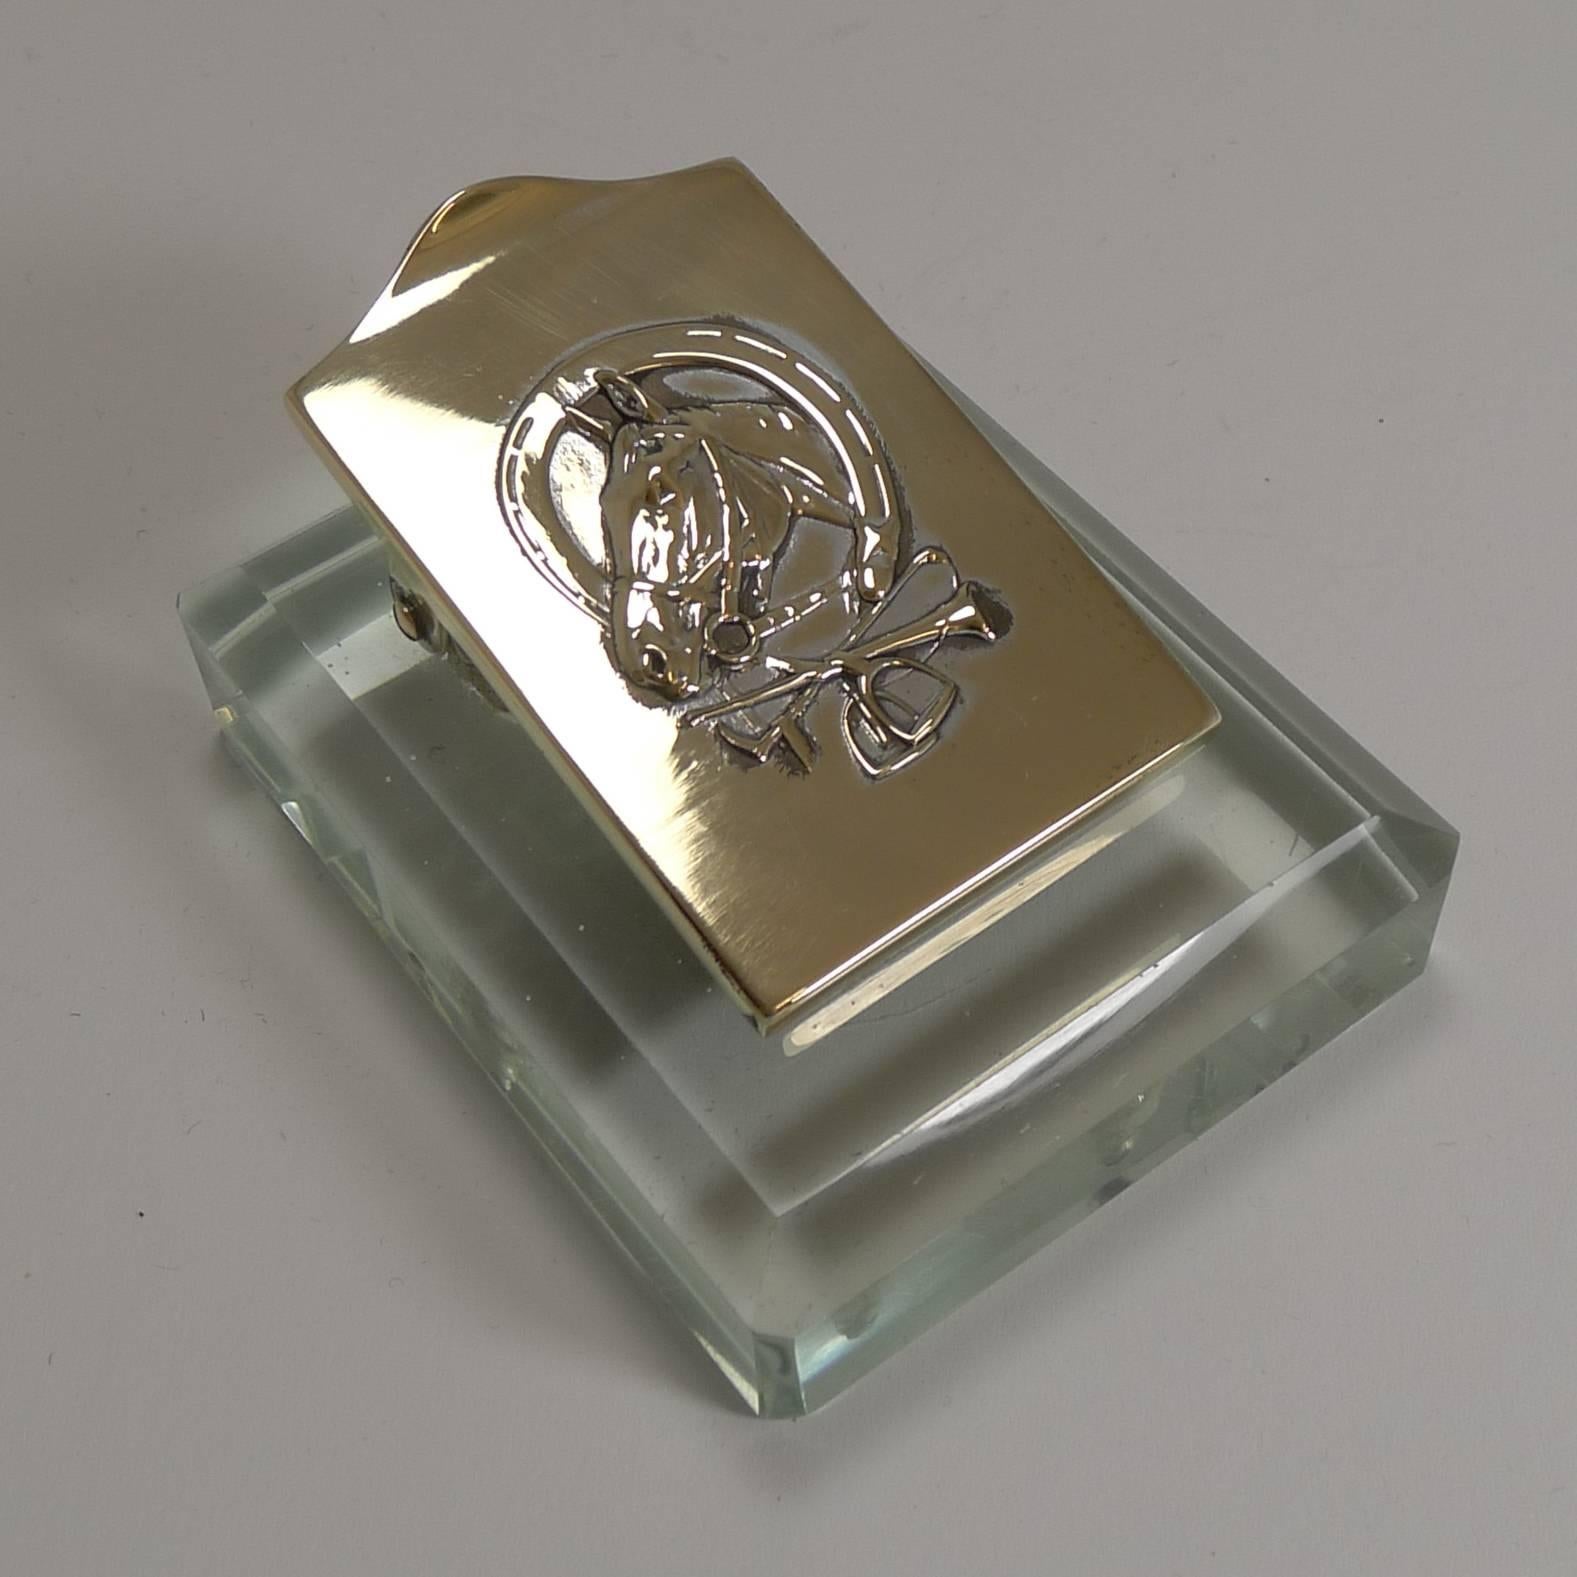 A charming and unusual desk-top letter clip, perfect for business cards, letters, receipts etc. With it's heavy glass base, it would also double as a paperweight.

The hinged polished brass clip features a horse head framed by a horseshoe and